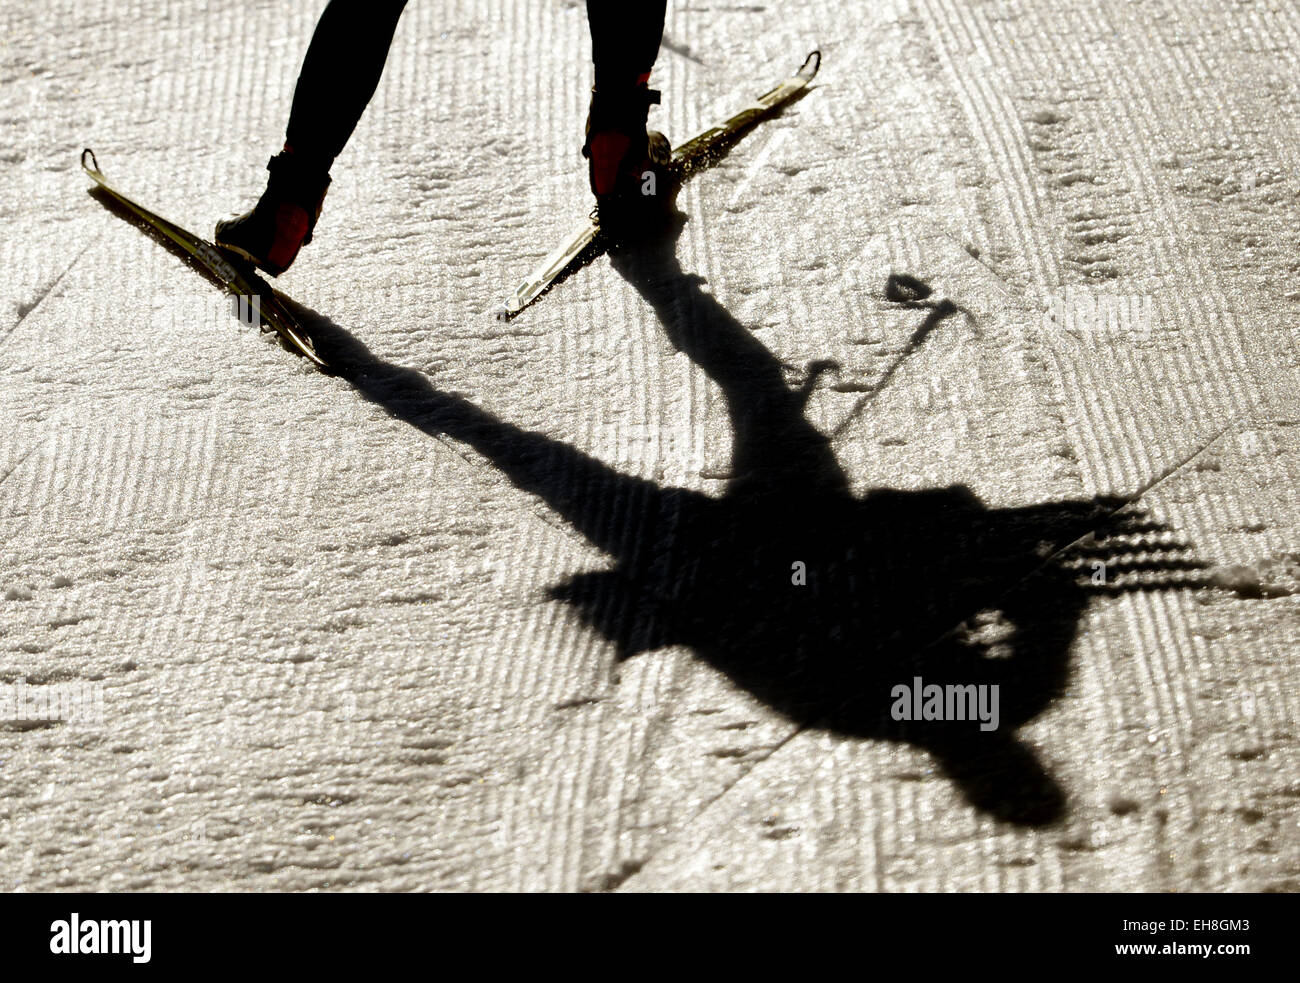 Kontiolahti, Finland. 09th Mar, 2015. A team technican is on the track at the Biathlon World Championships in Kontiolahti, Finland, 09 March 2015. Photo: Ralf Hirschberger/dpa/Alamy Live News Stock Photo